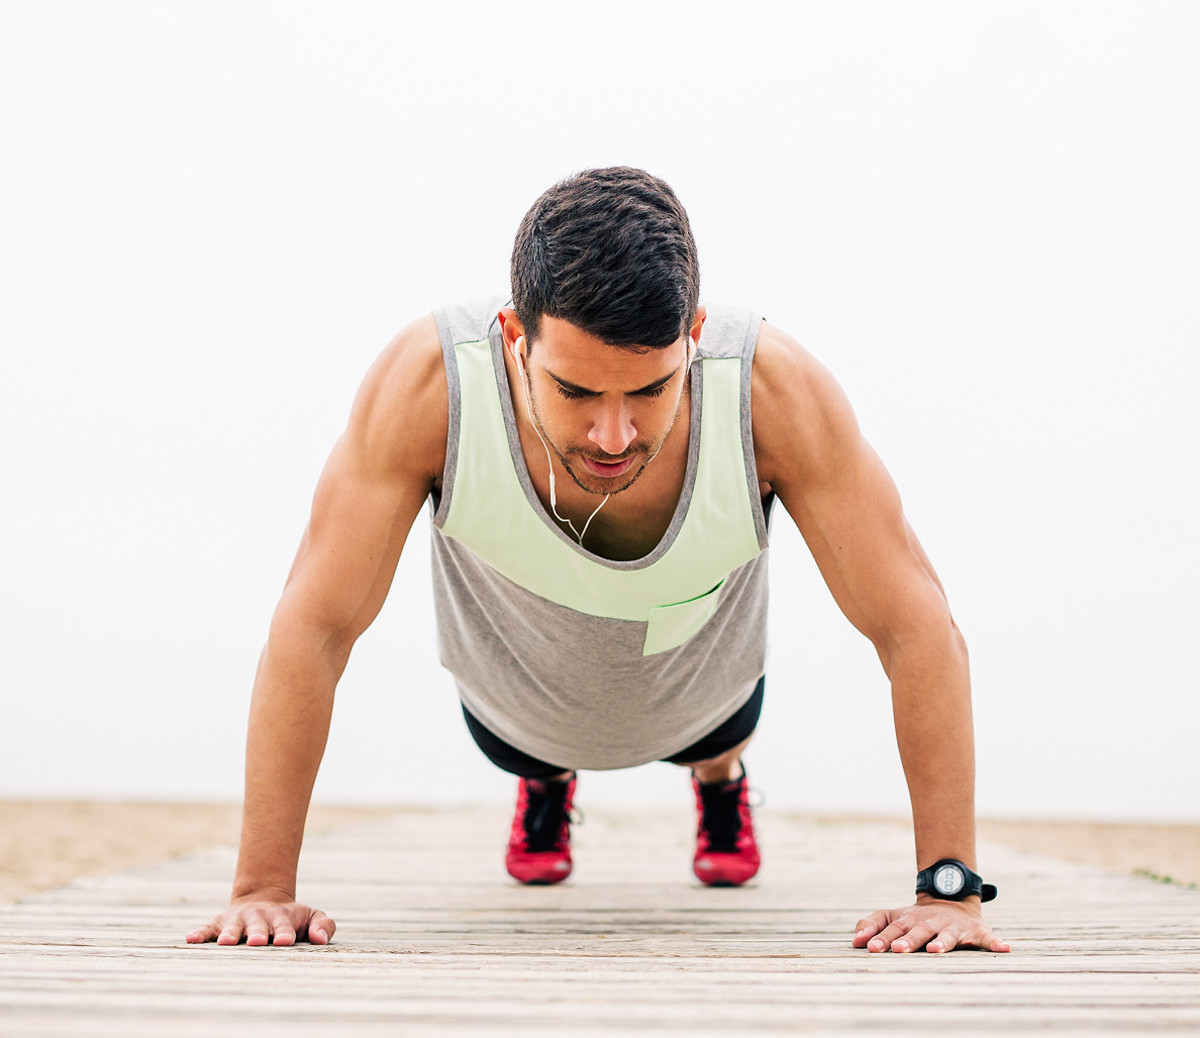 5 Ways to Make Your Pushups More Productive - Men's Journal